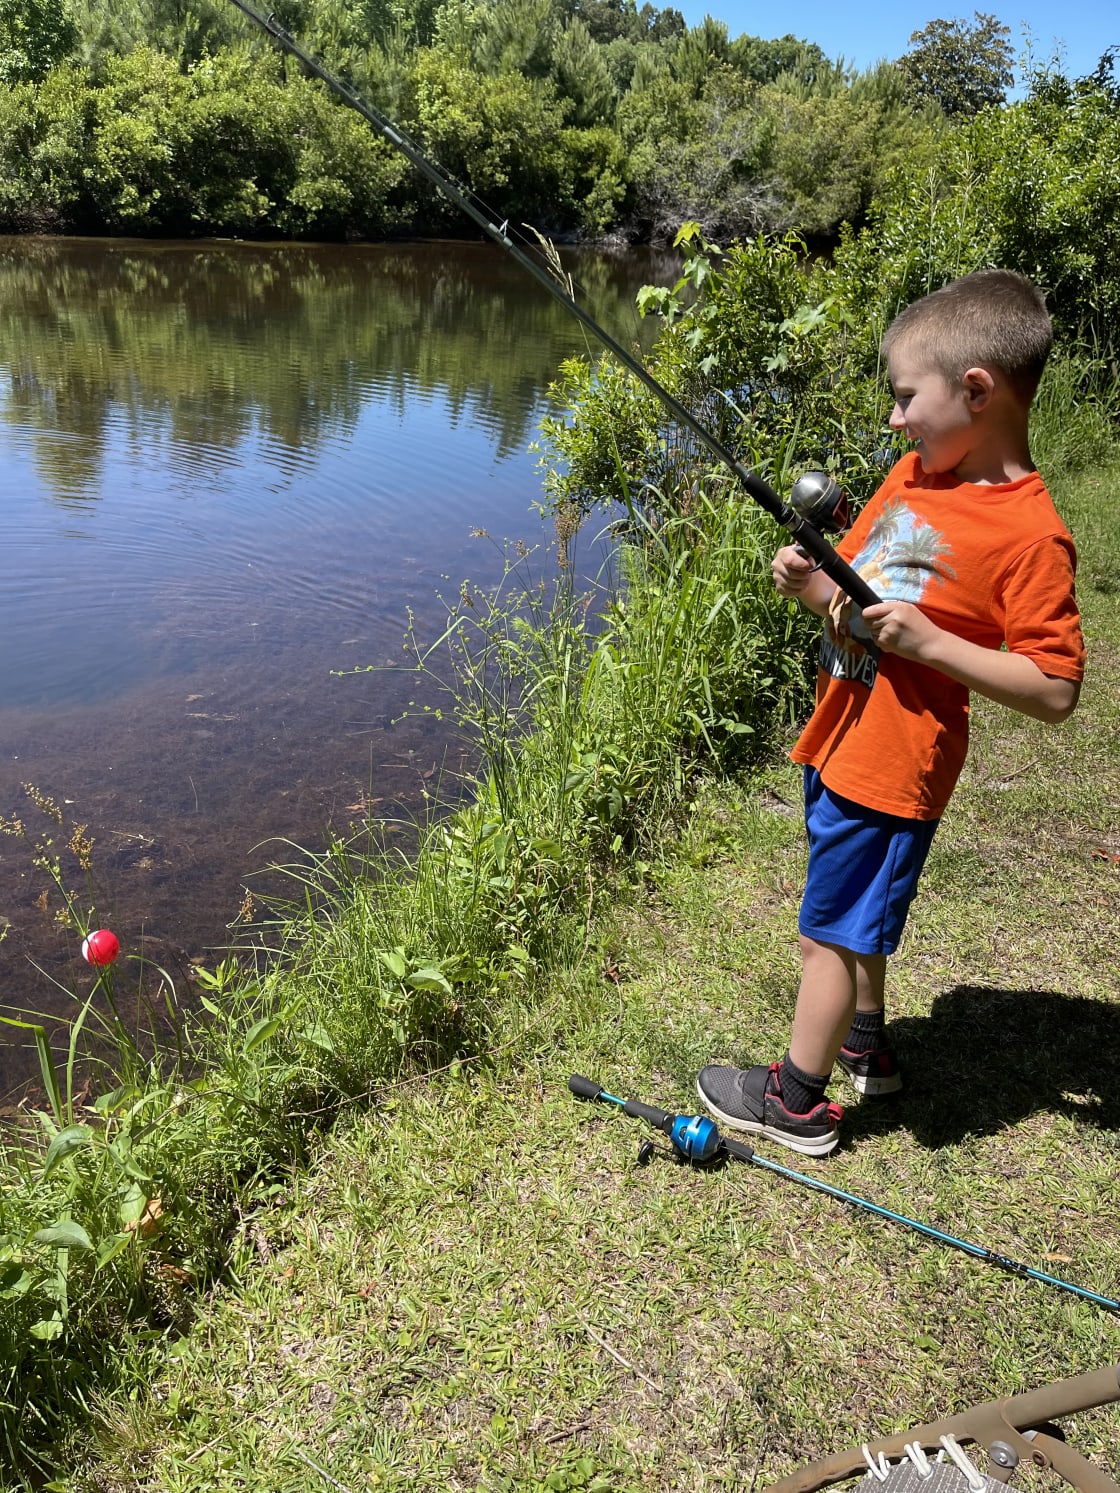 My son fishing in the pond. 